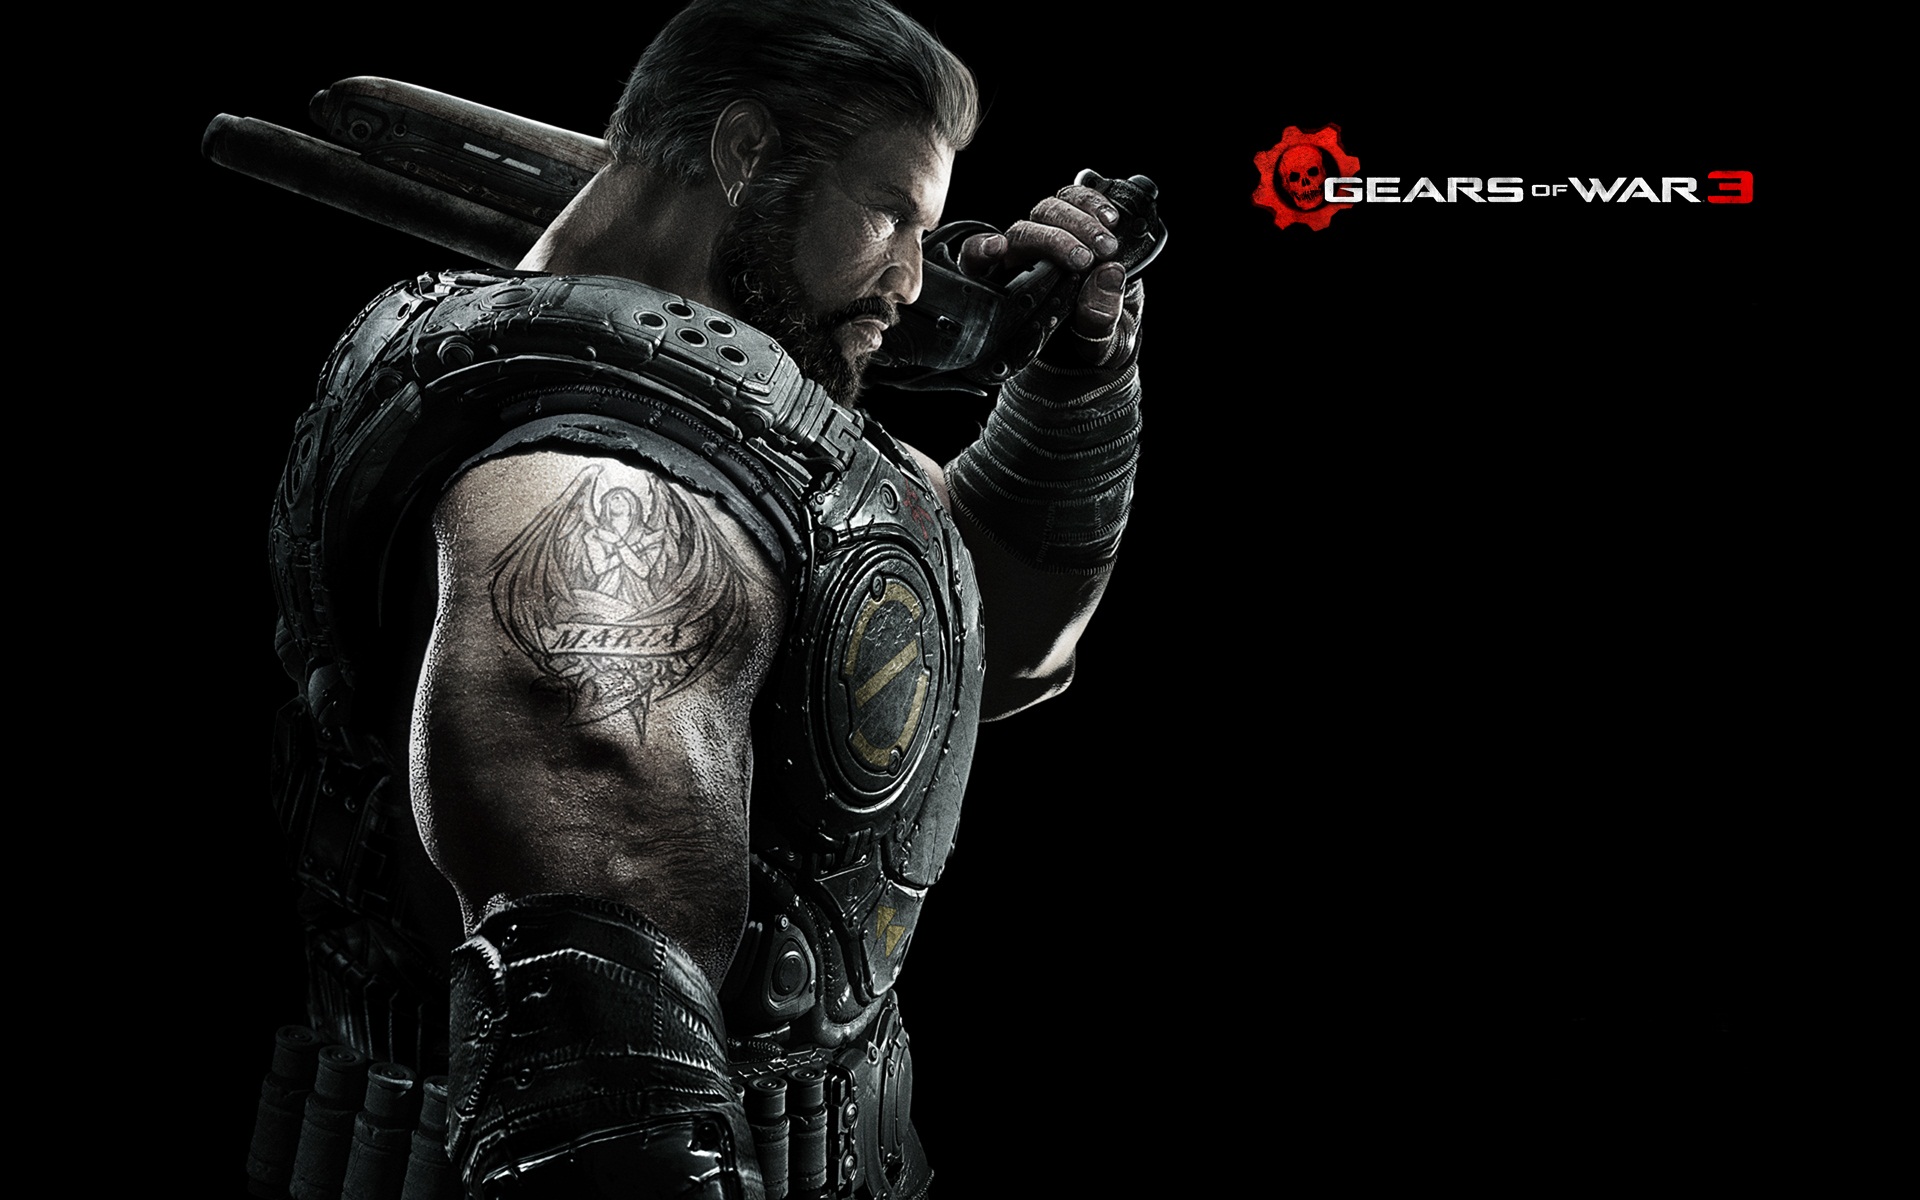 Home Browse All Dom Gears of War 3